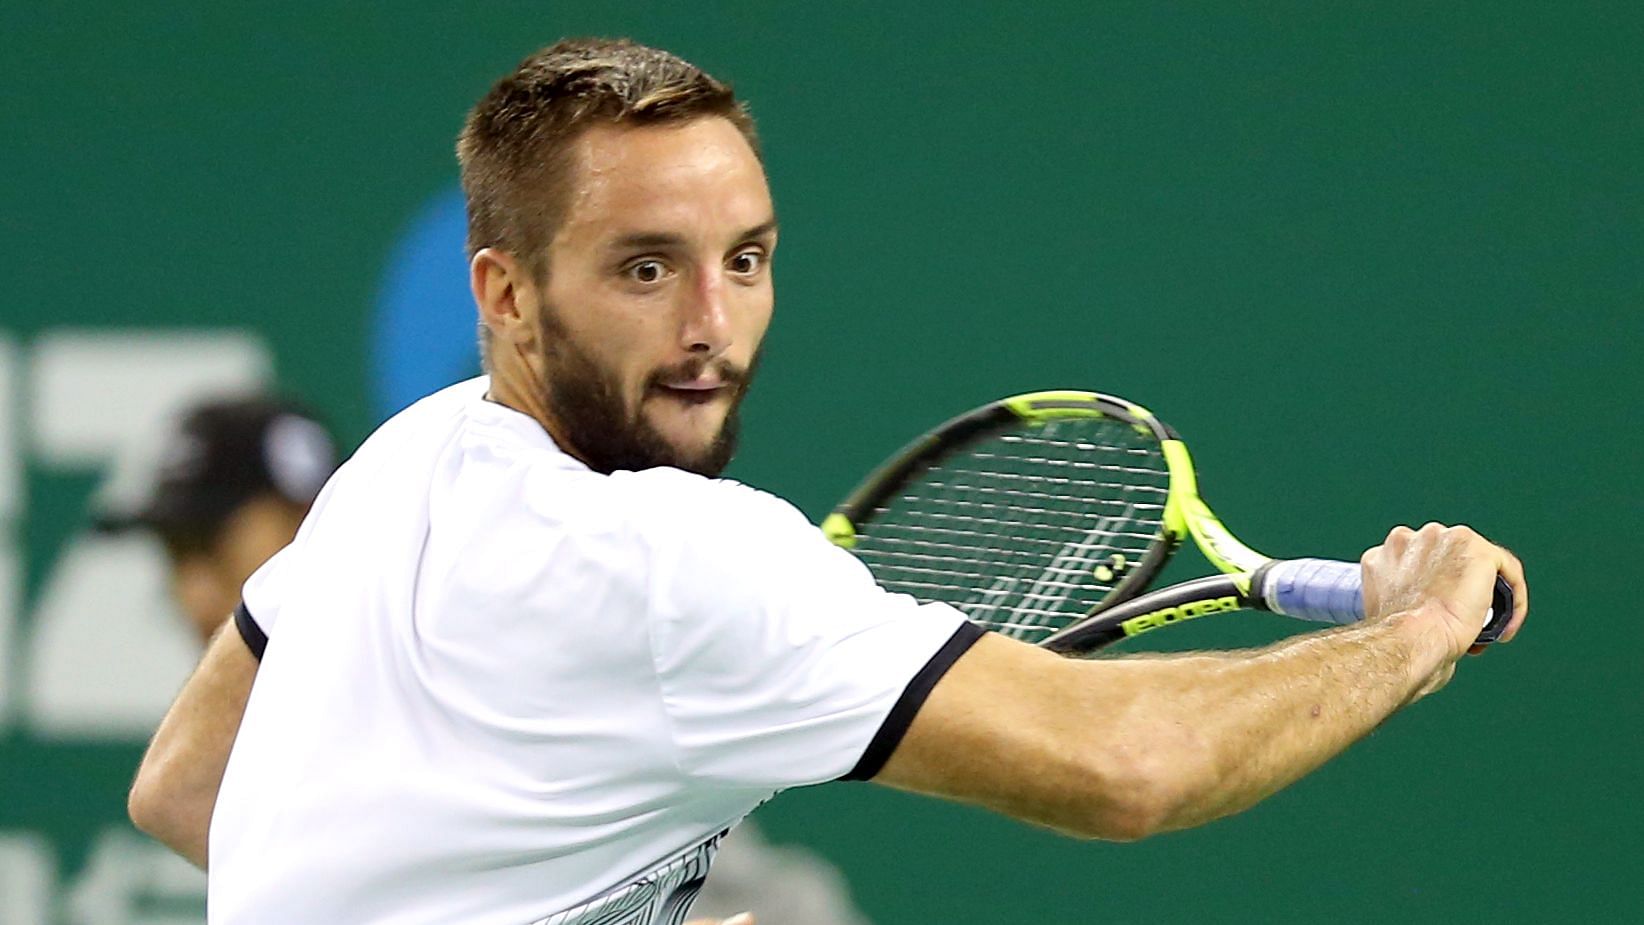 Viktor Troicki has become the latest players to test positive for coronavirus after playing in Novak Djokovic’s Adria Tour.